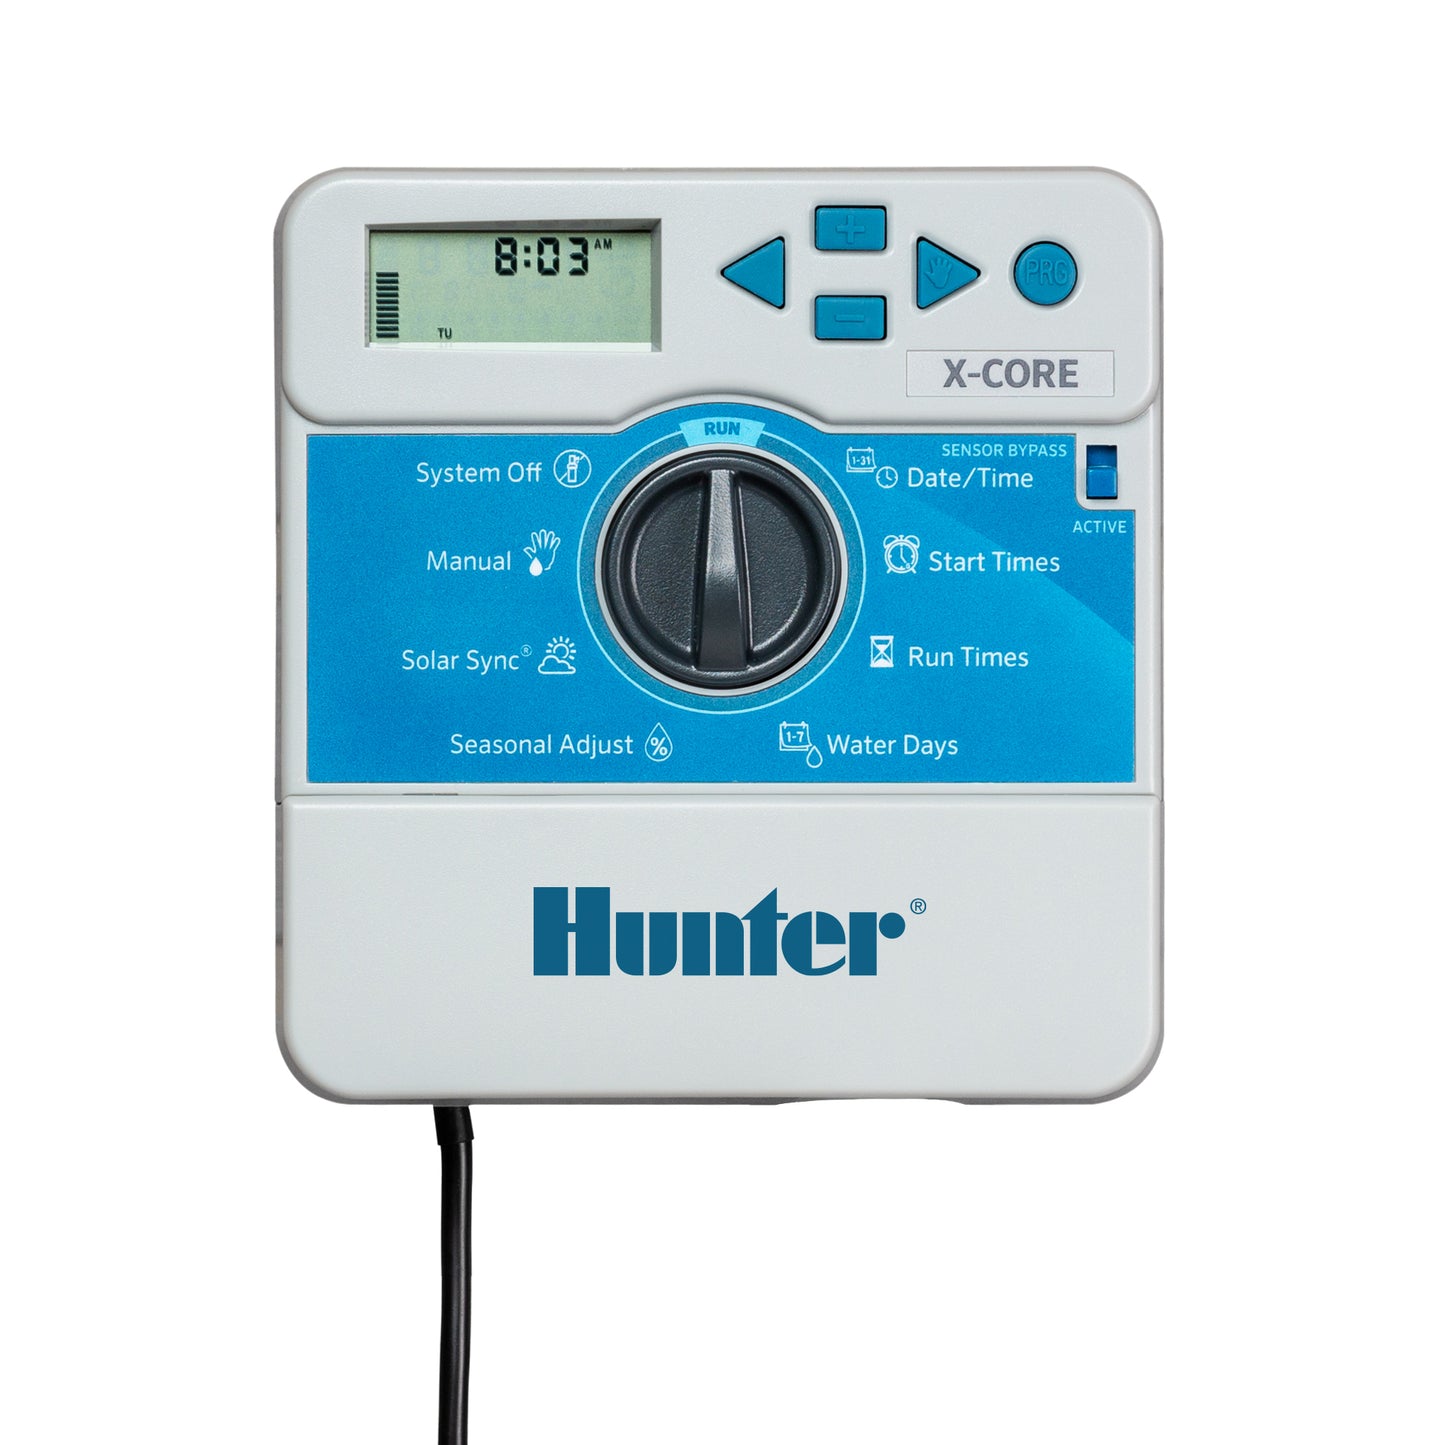 XC-400I - X-CORE 4-Station Indoor Irrigation Controller